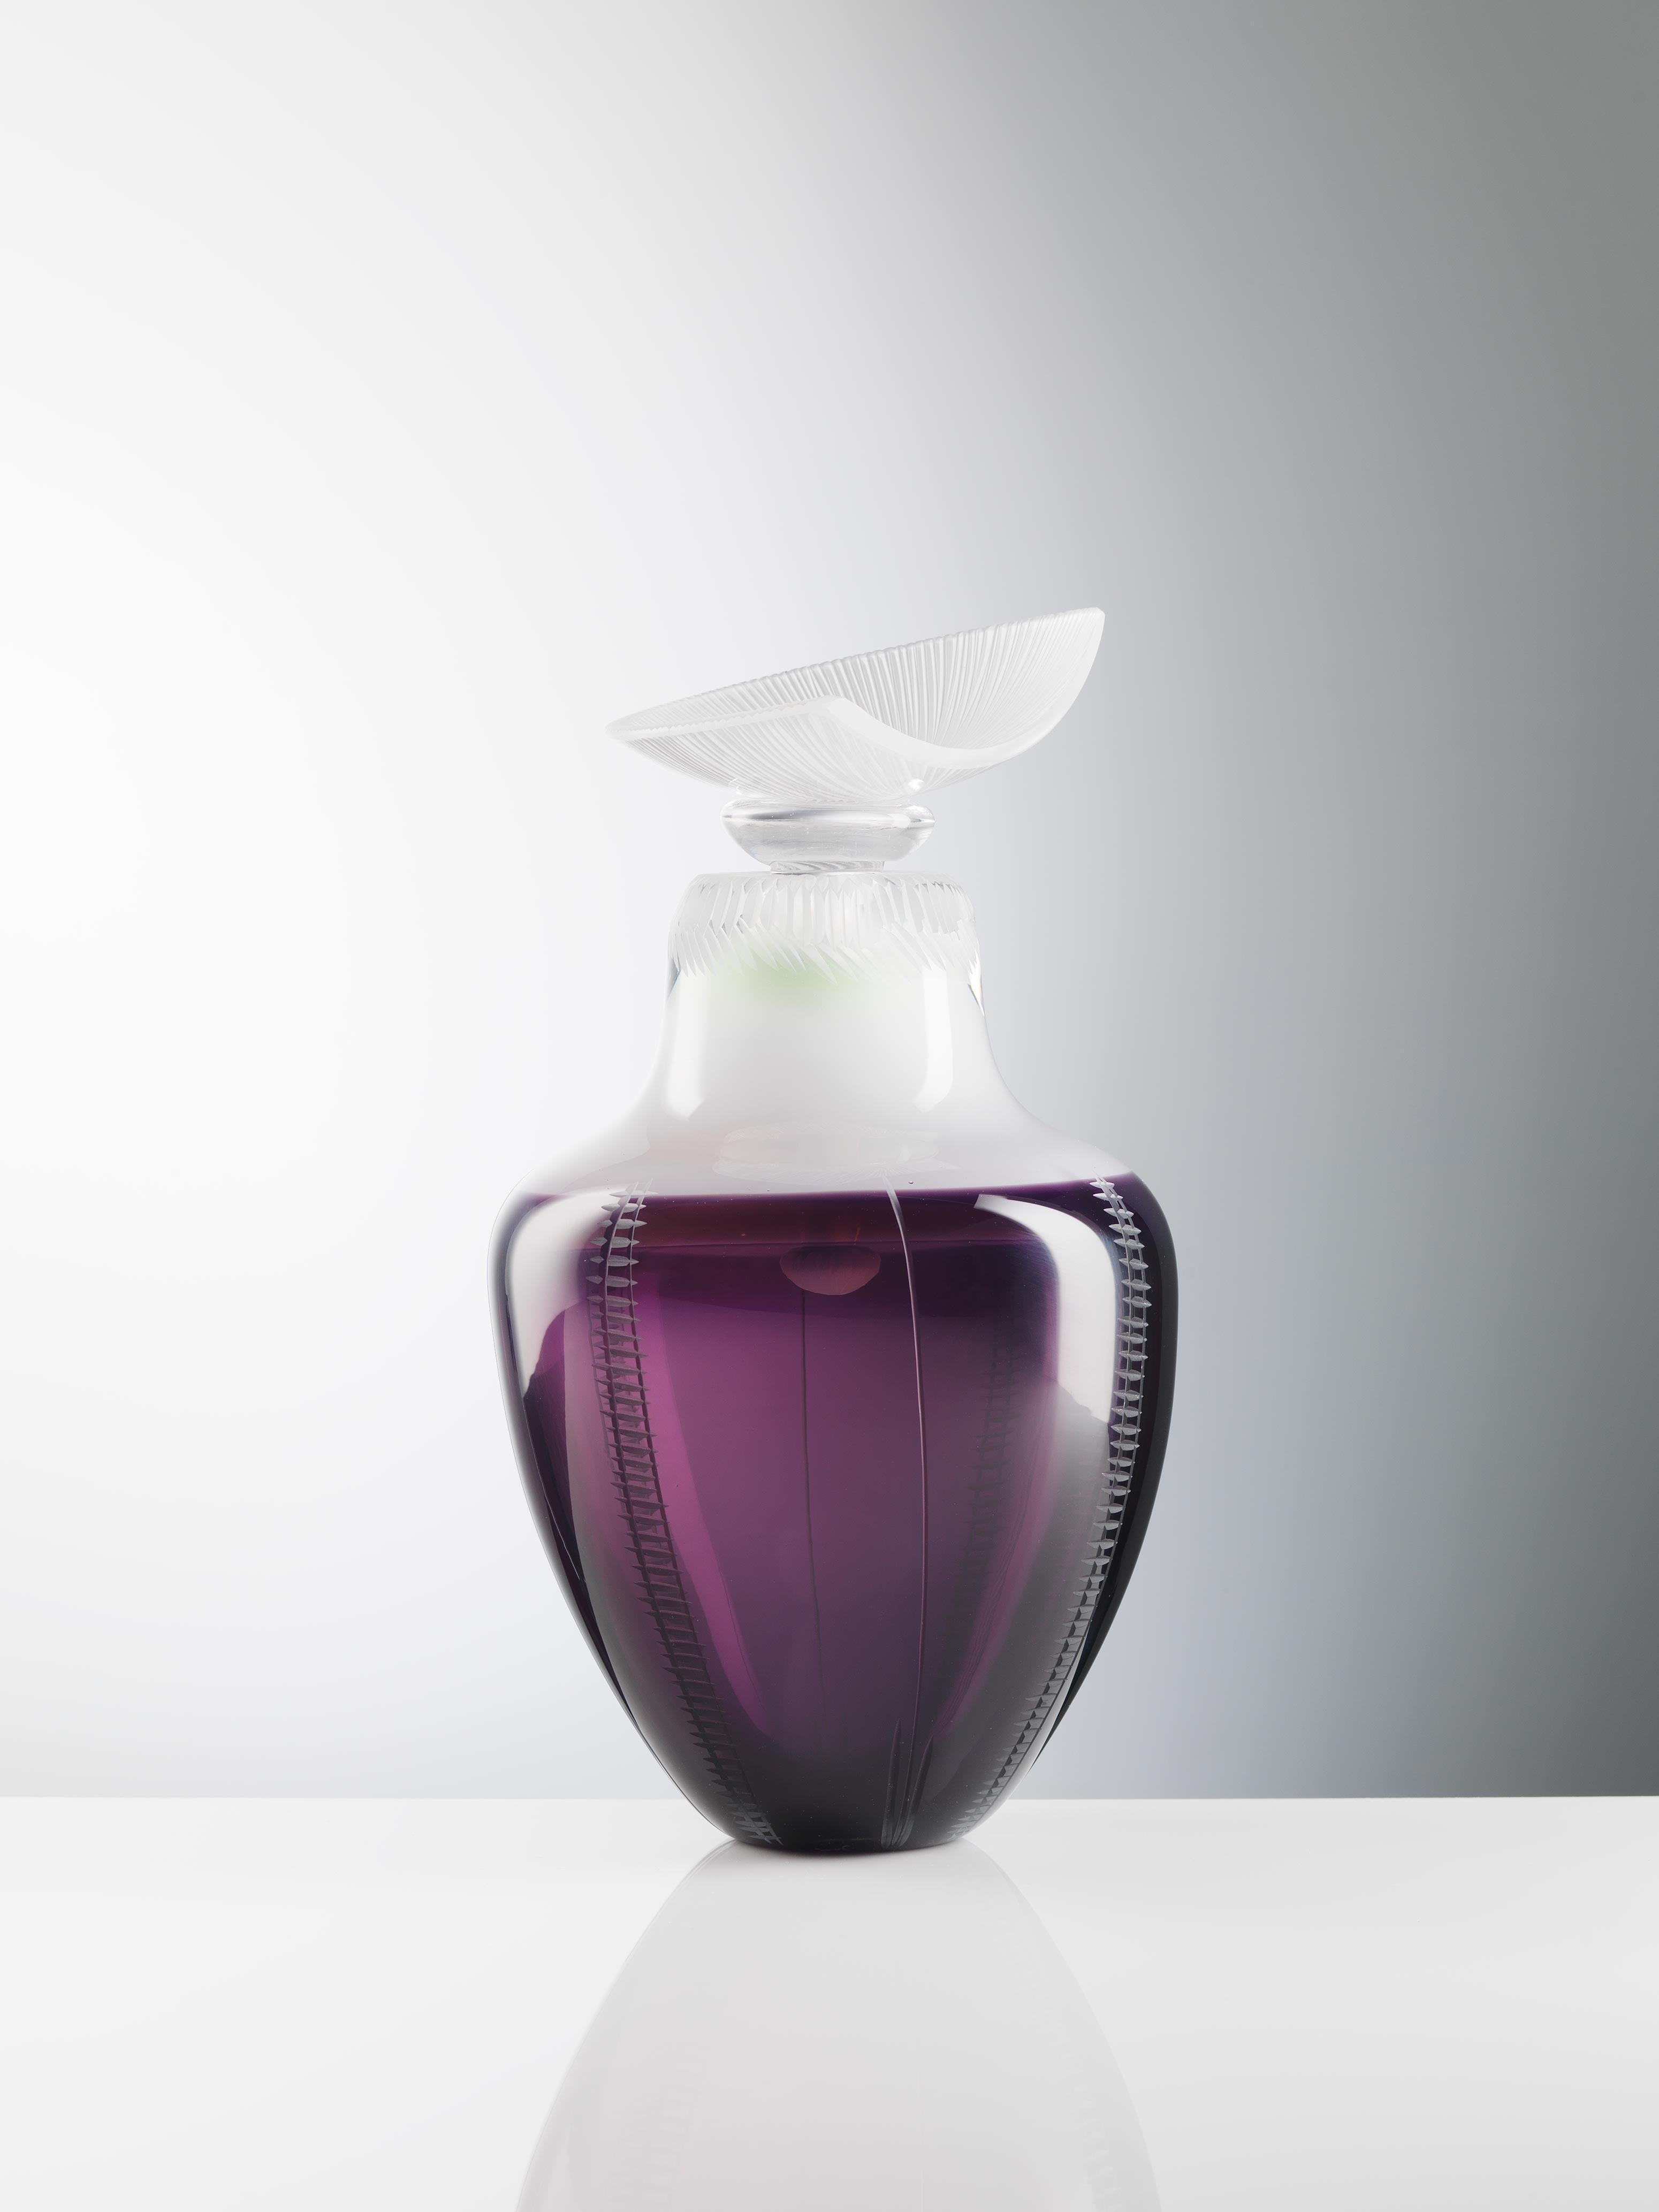 Morado Menta solace3 sculpted blown glass vase handmade by Juli Bolaños-Durman
Solace collection, 2016-2017
One of a kind
Dimensions: 12.6 x 7.9 x 7.9 inches
Materials: Found & blown glass with cuttings

This piece is made of two parts: